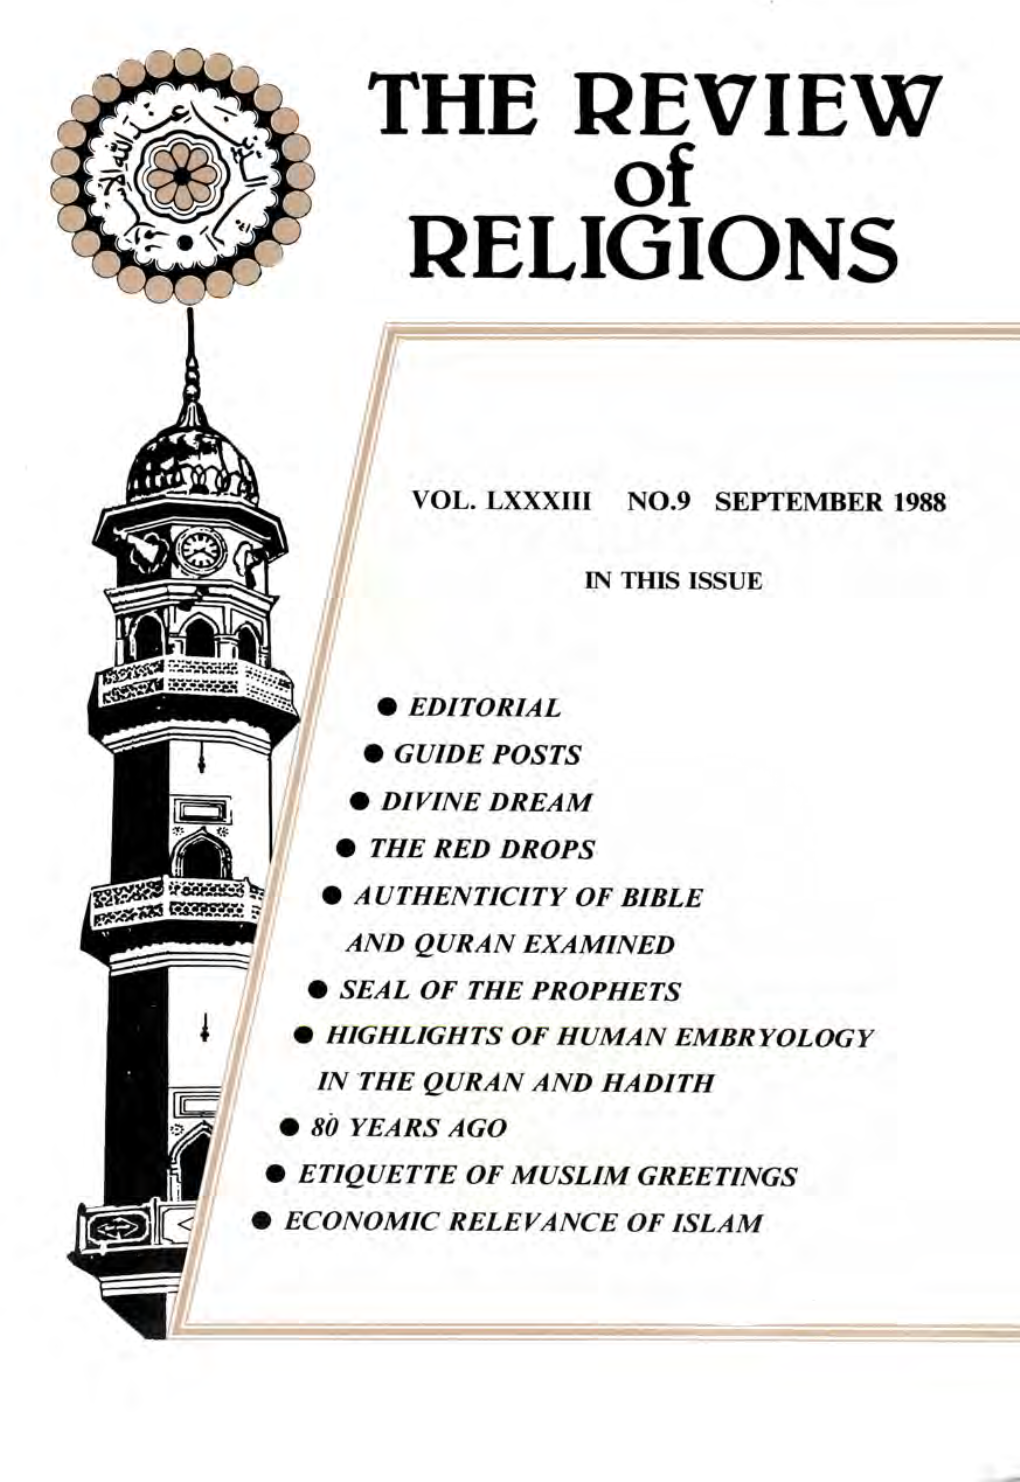 The Review of Religions, September 1988